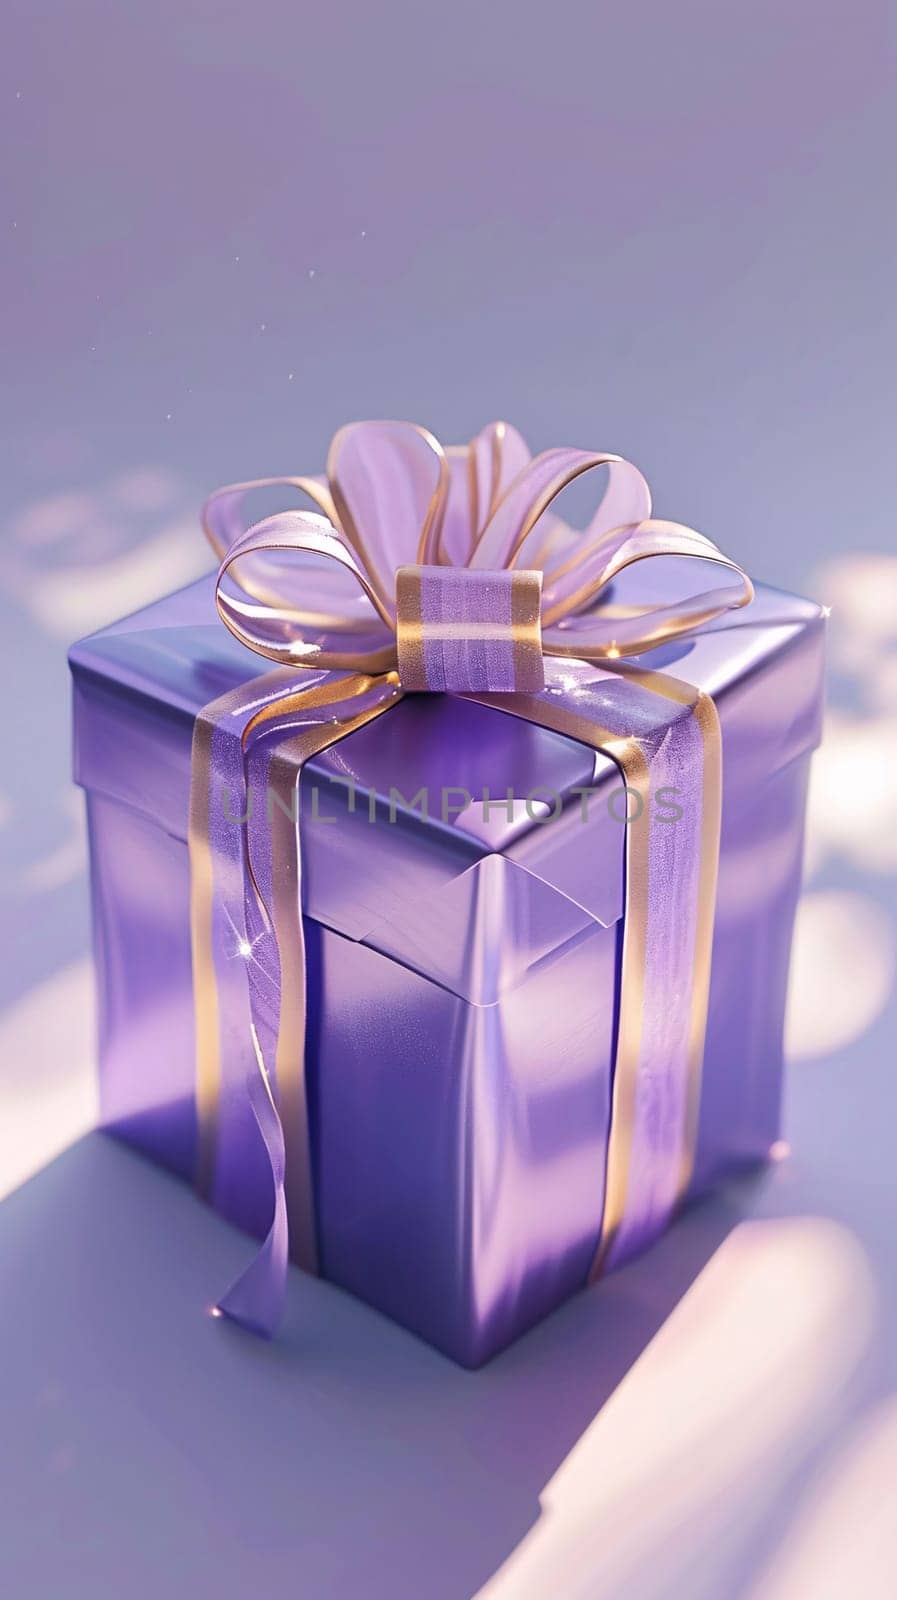 Purple gift with a bow on a dark background. Gifts as a day symbol of present and love. A time of falling in love and love.